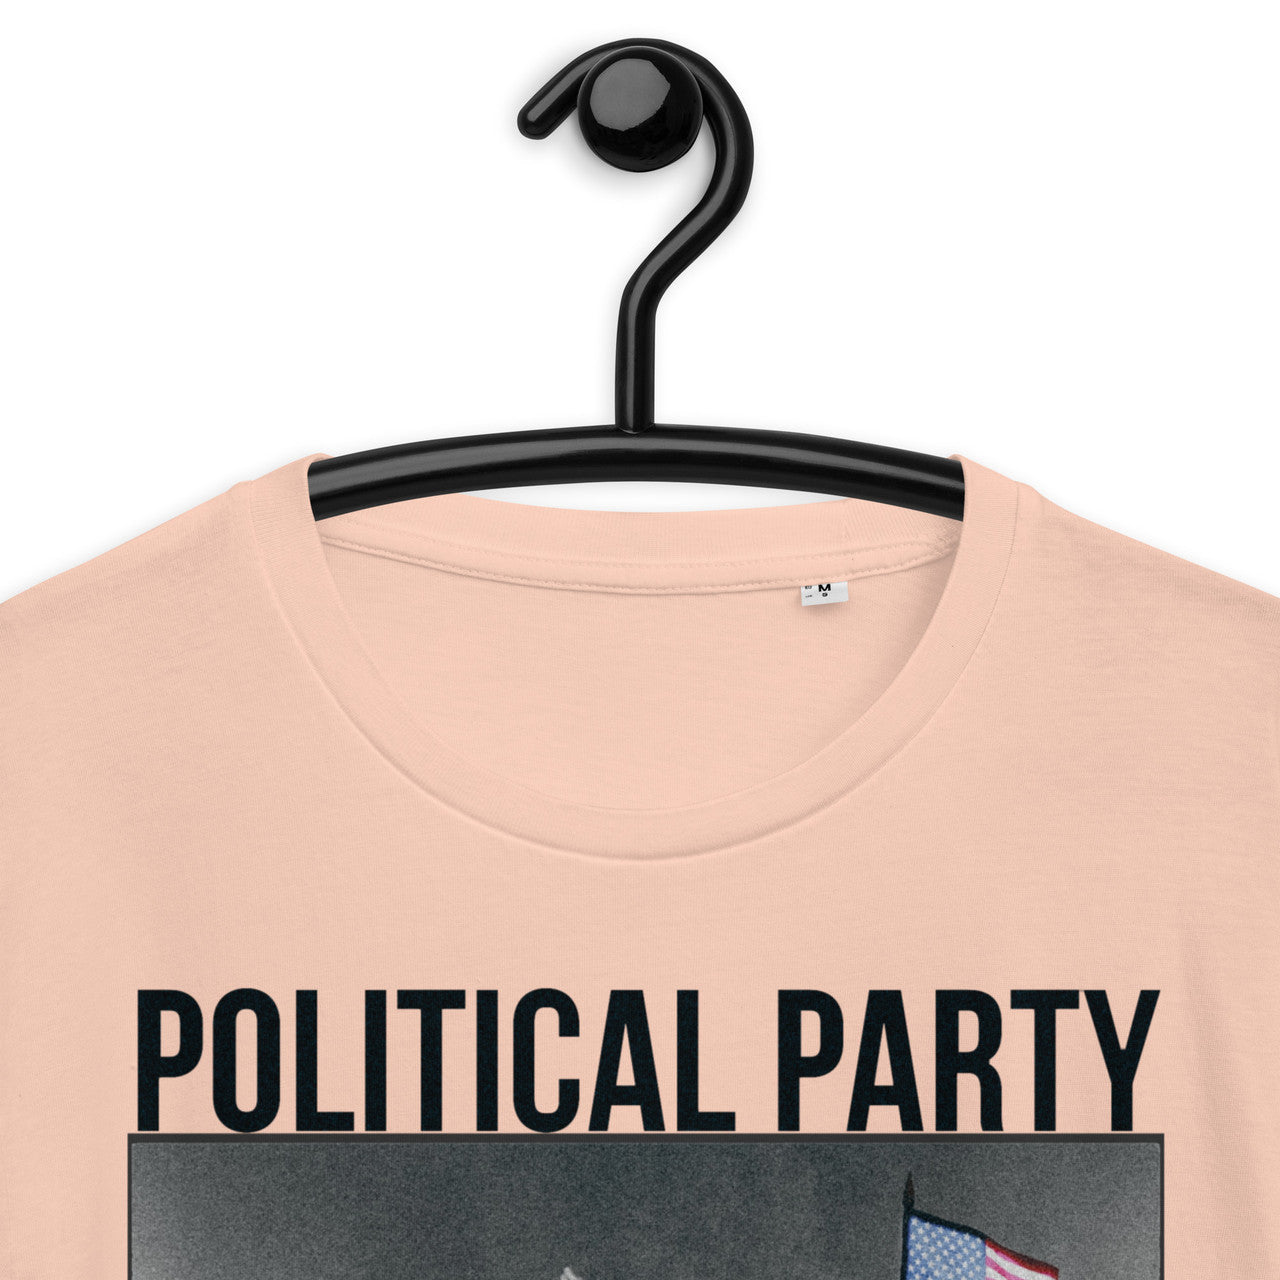 Political Party KiSS Unisex organic cotton t-shirt - Obama JFK Lincoln project x